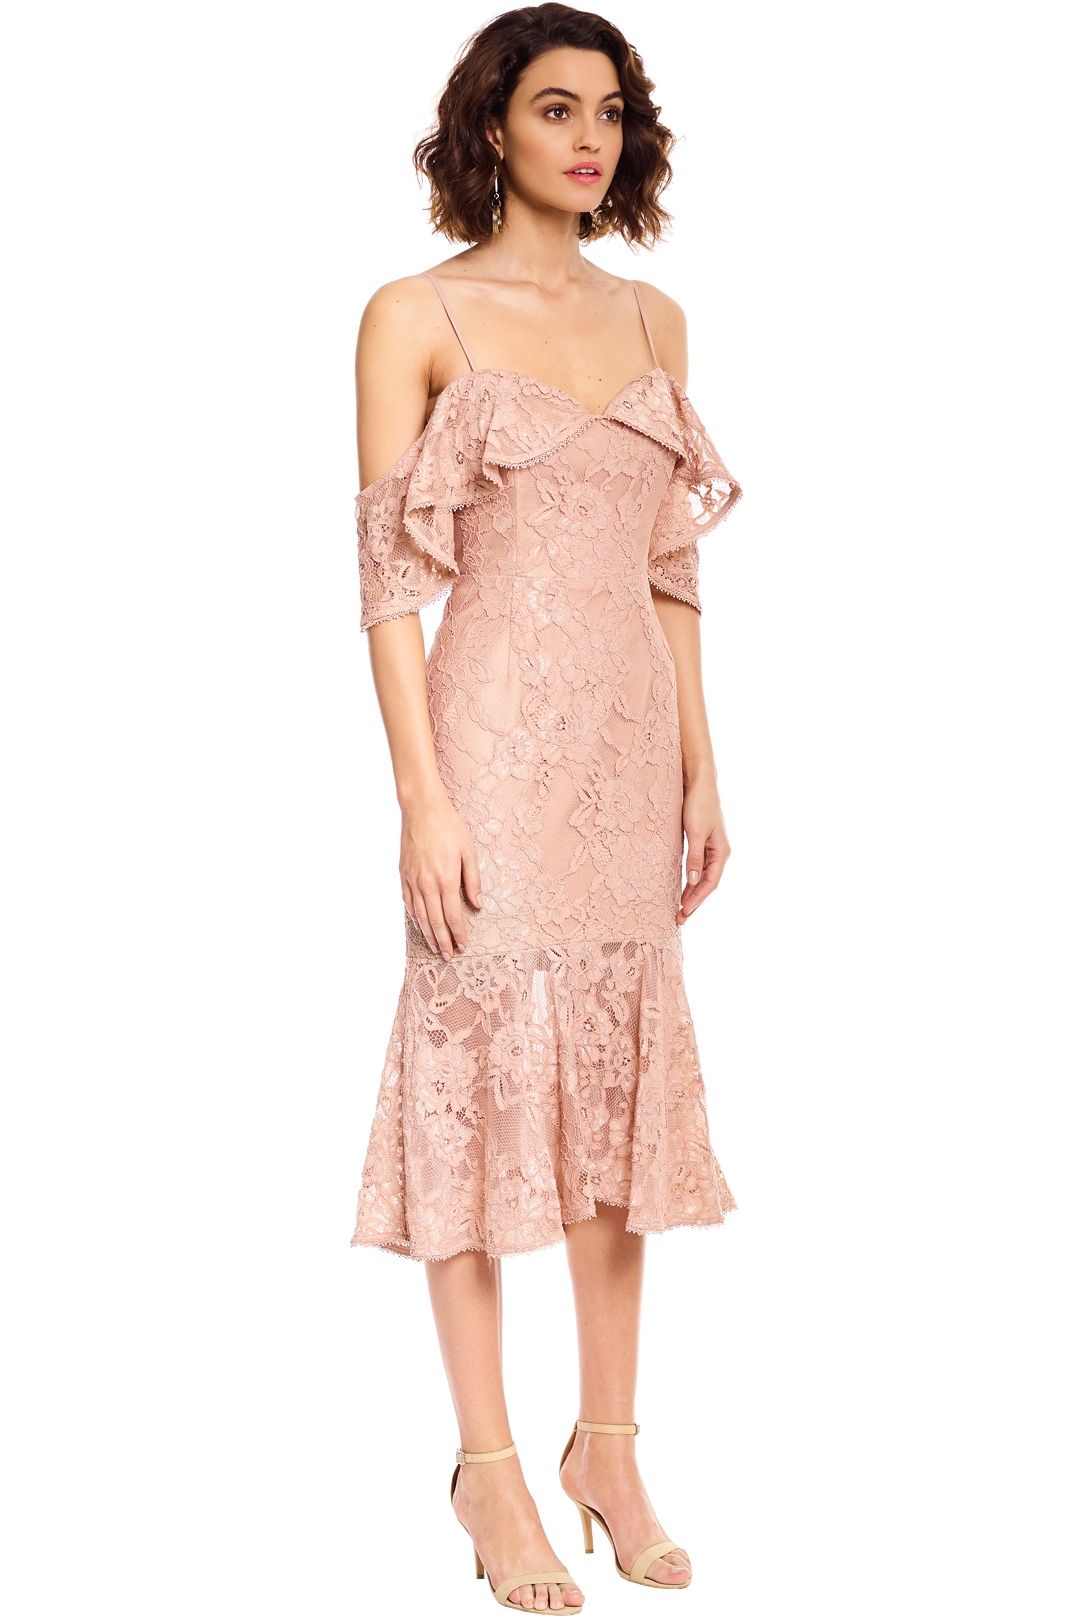 Rodeo Show - Manuela Lace Dress - Nude - Side